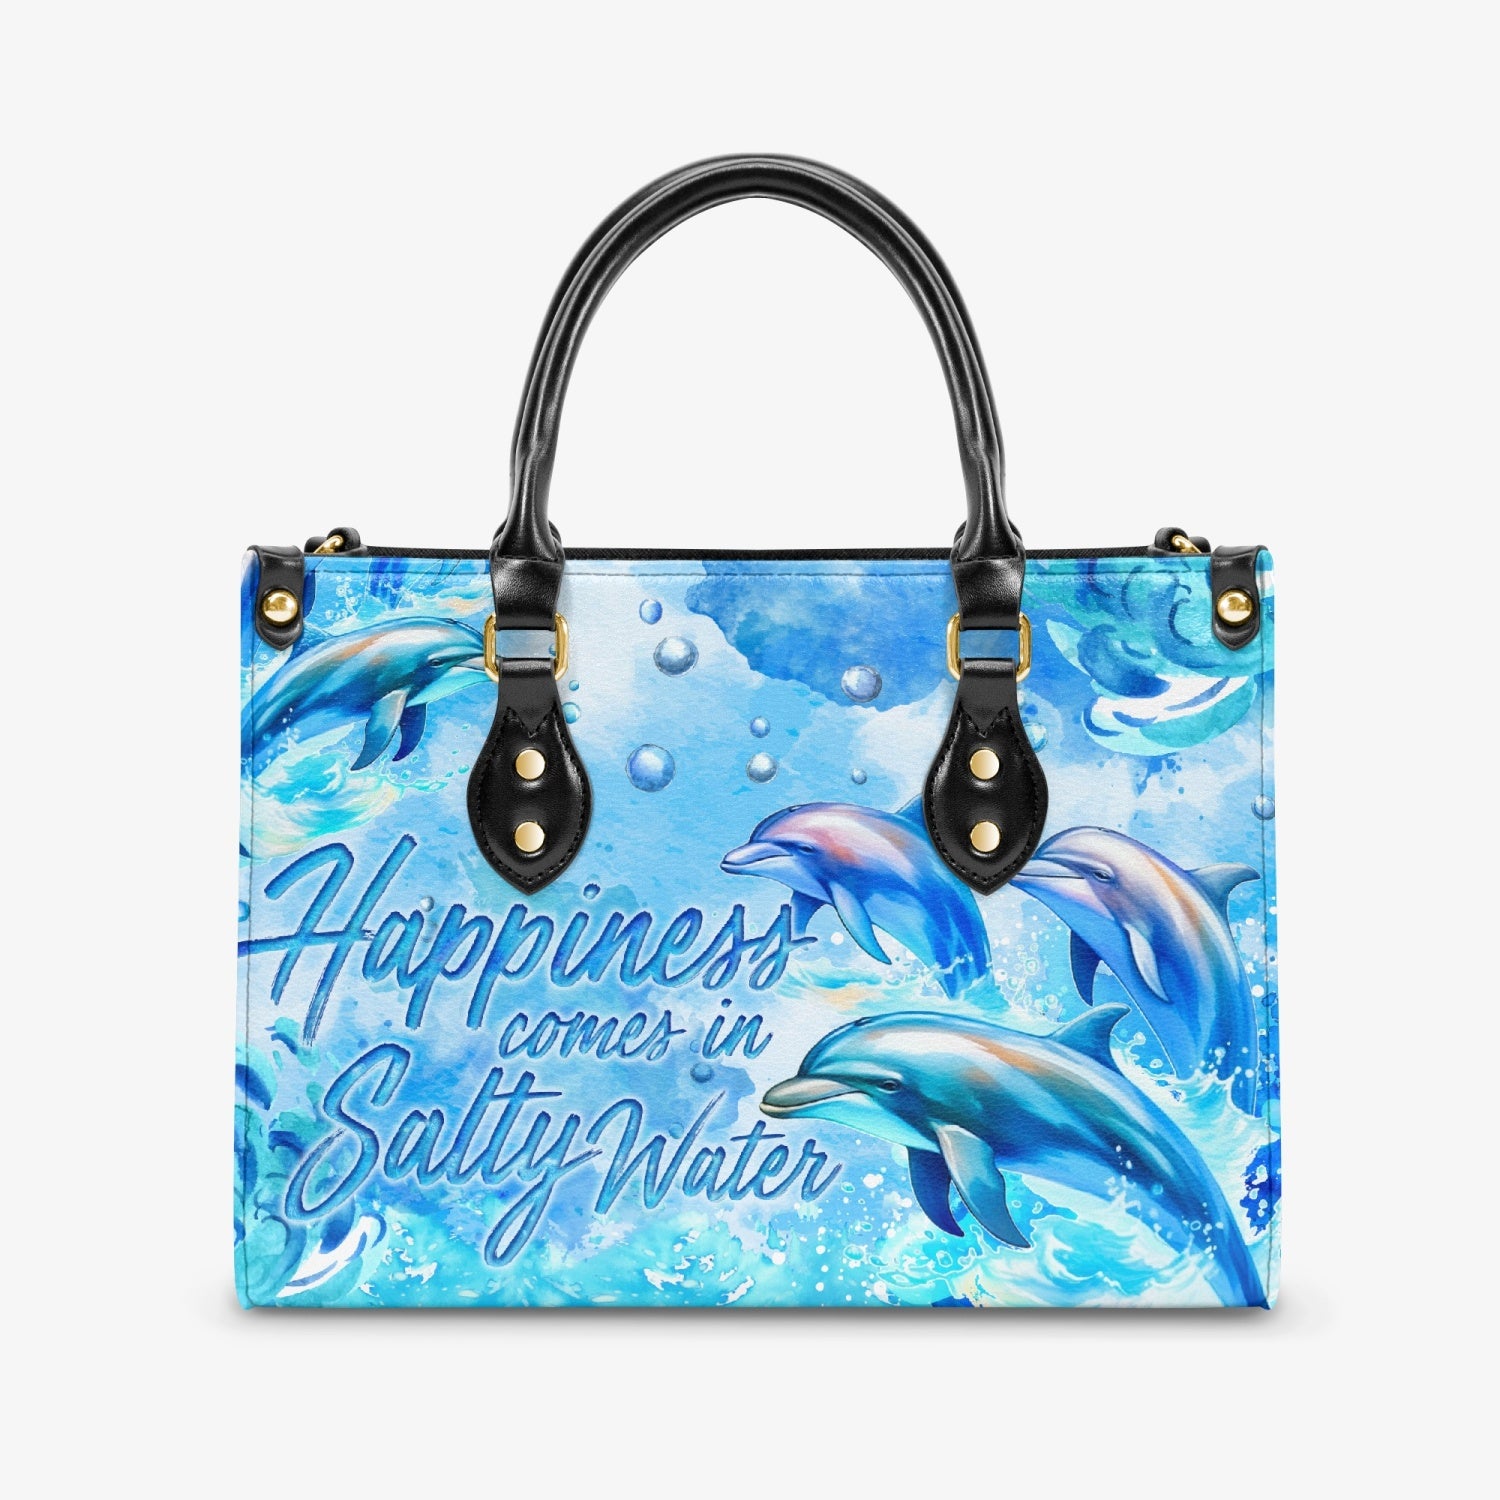 HAPPINESS COMES IN SALTY WATER DOLPHIN LEATHER HANDBAG - TYQY0504243